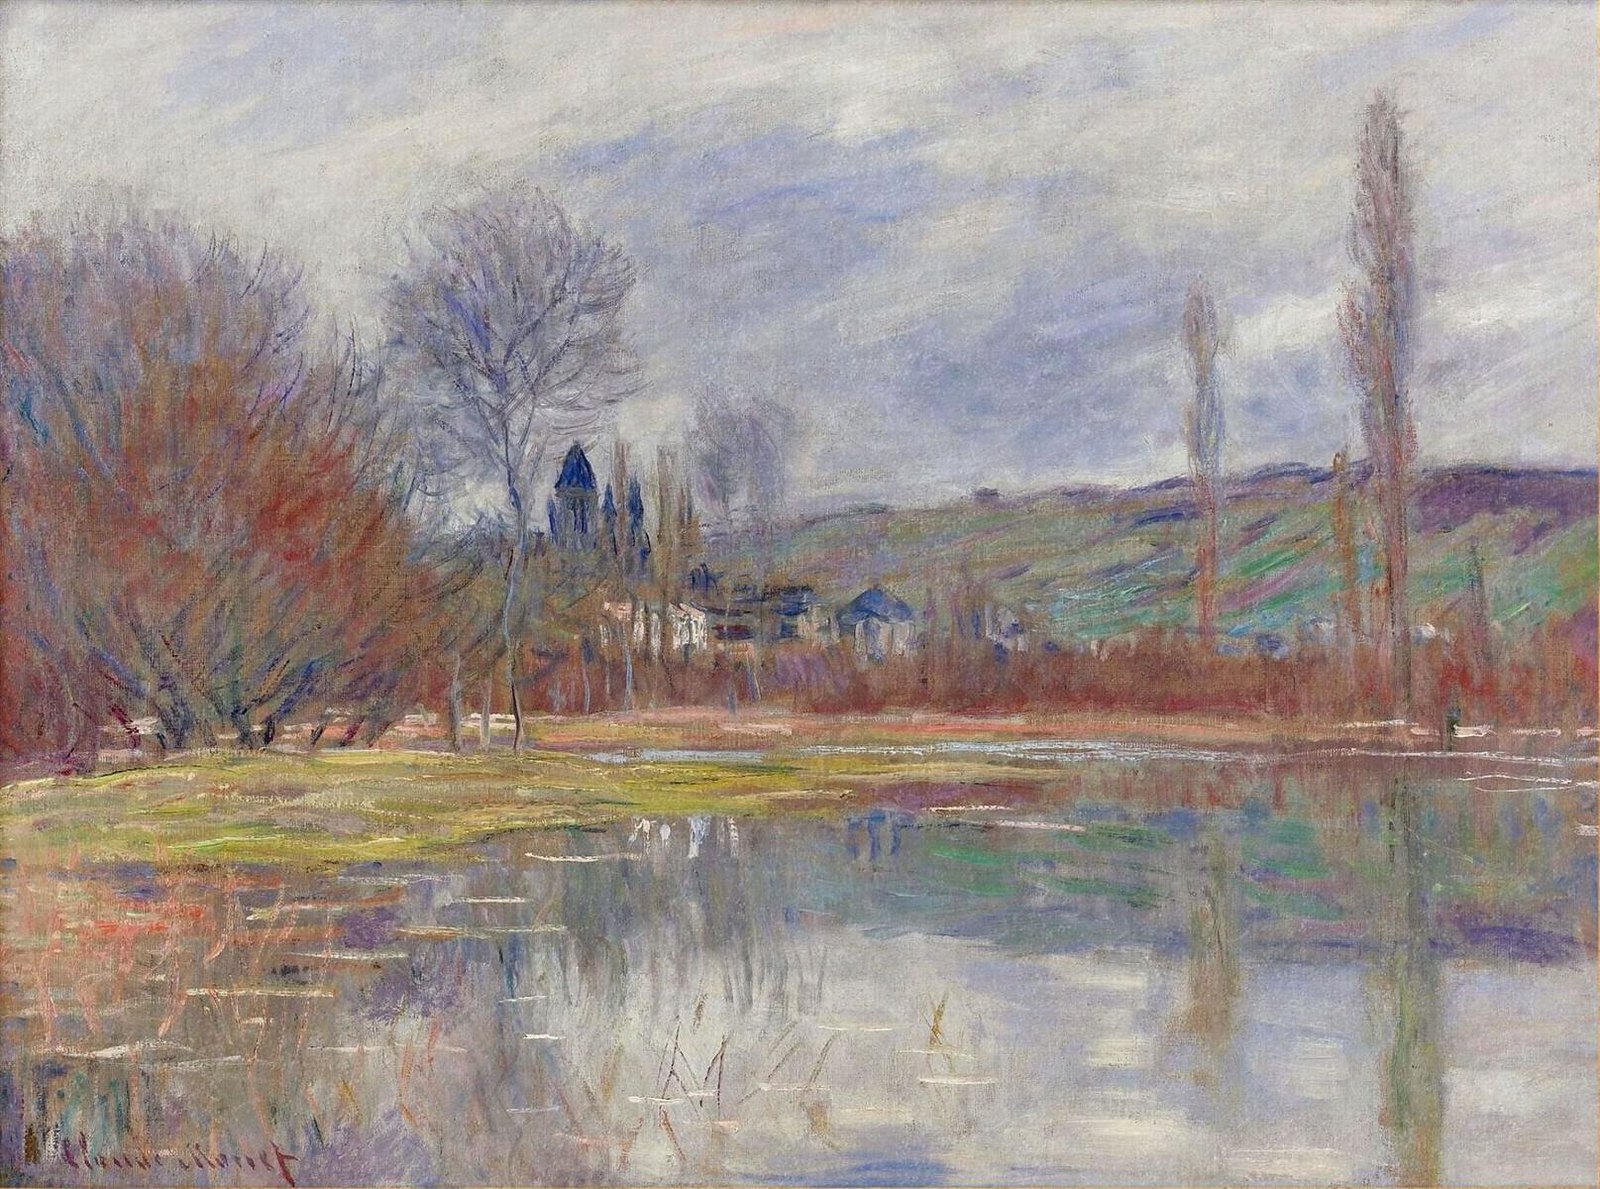 The Spring at Vetheuil by Claude Monet, 1881